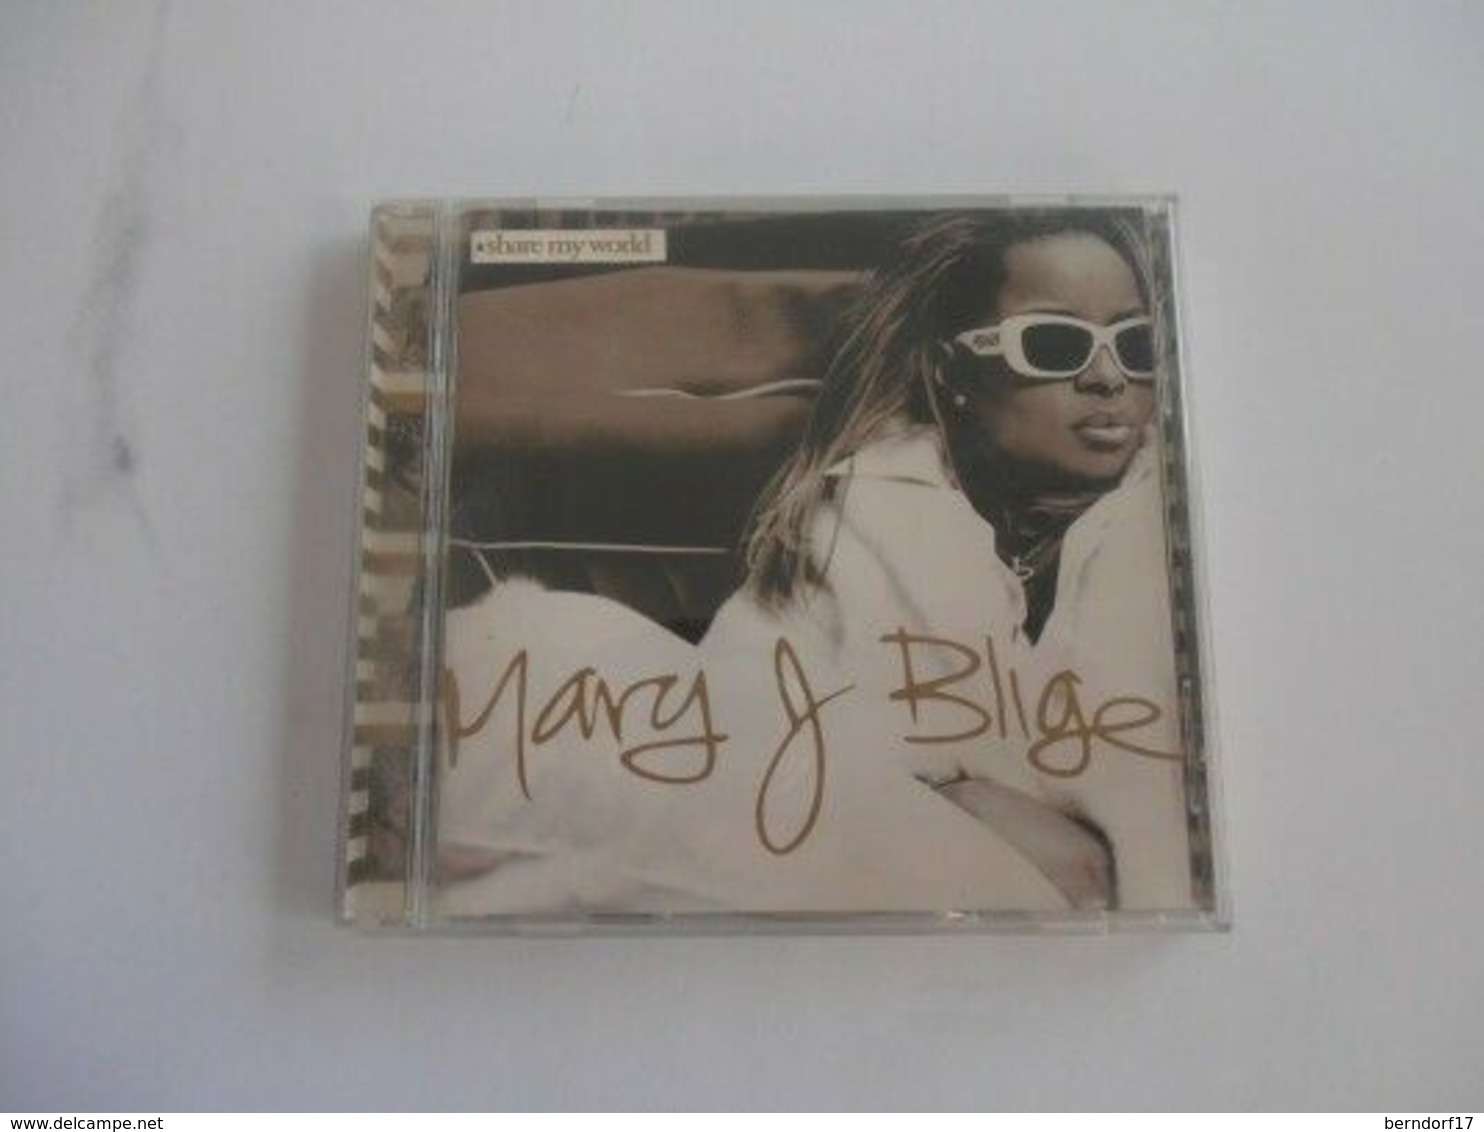 Mary L. Blige - Share My World - CD - Hard Rock & Metal